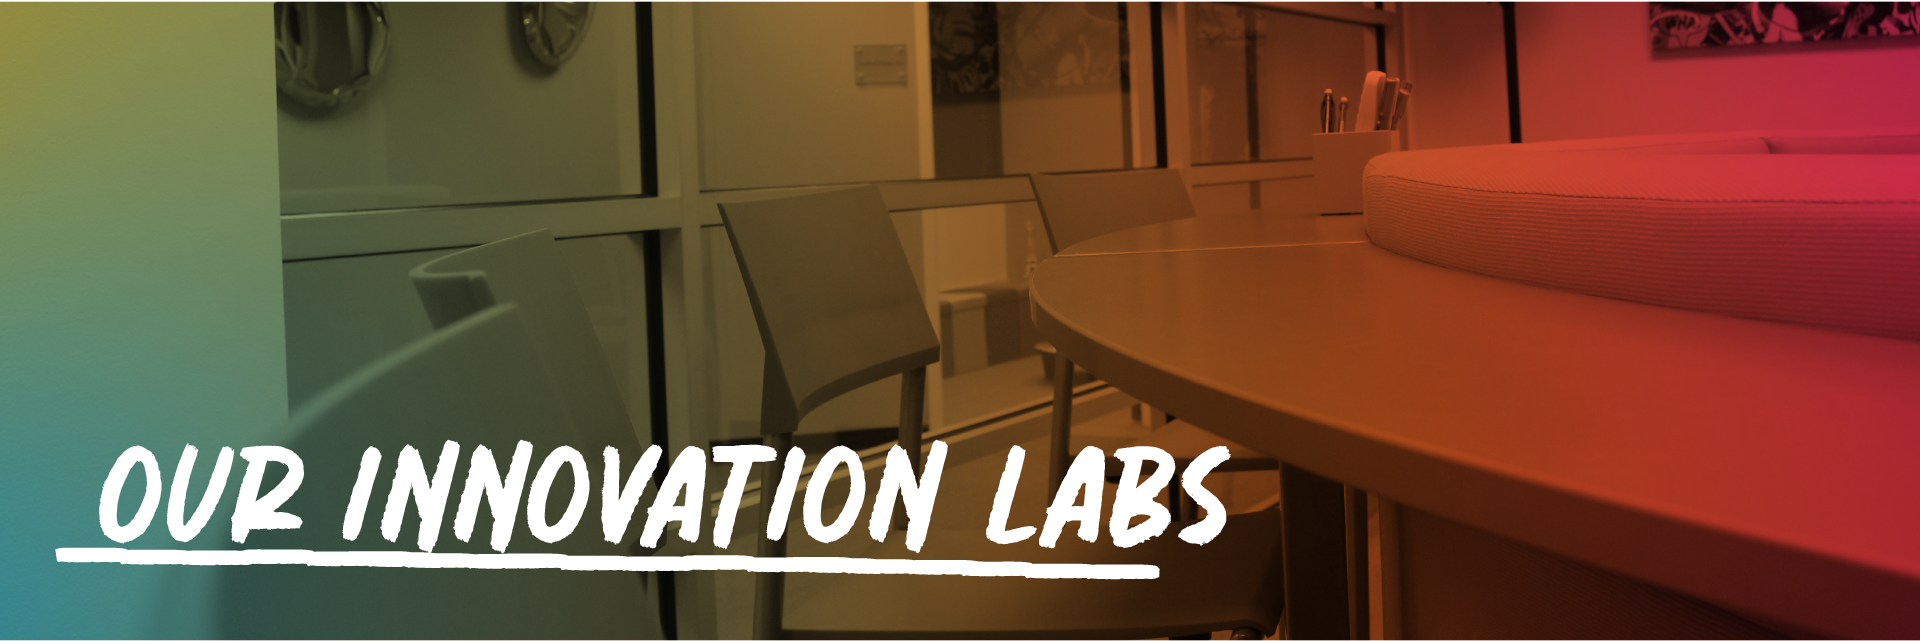 Header Image: Our Innovation Labs